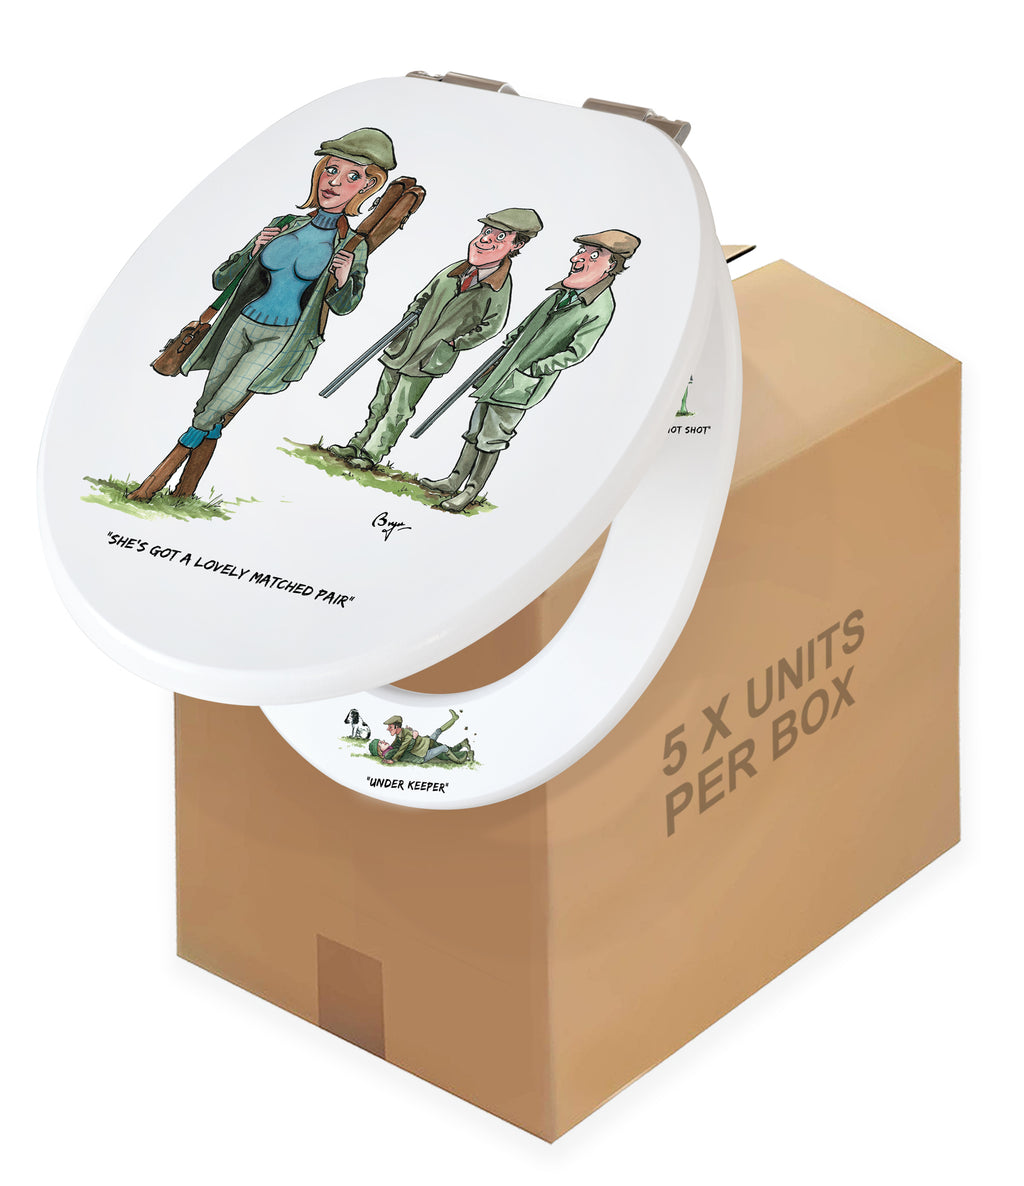 Matched Pair - Bryn Parry- Toilet Seat. BOX OF 5 UNITS